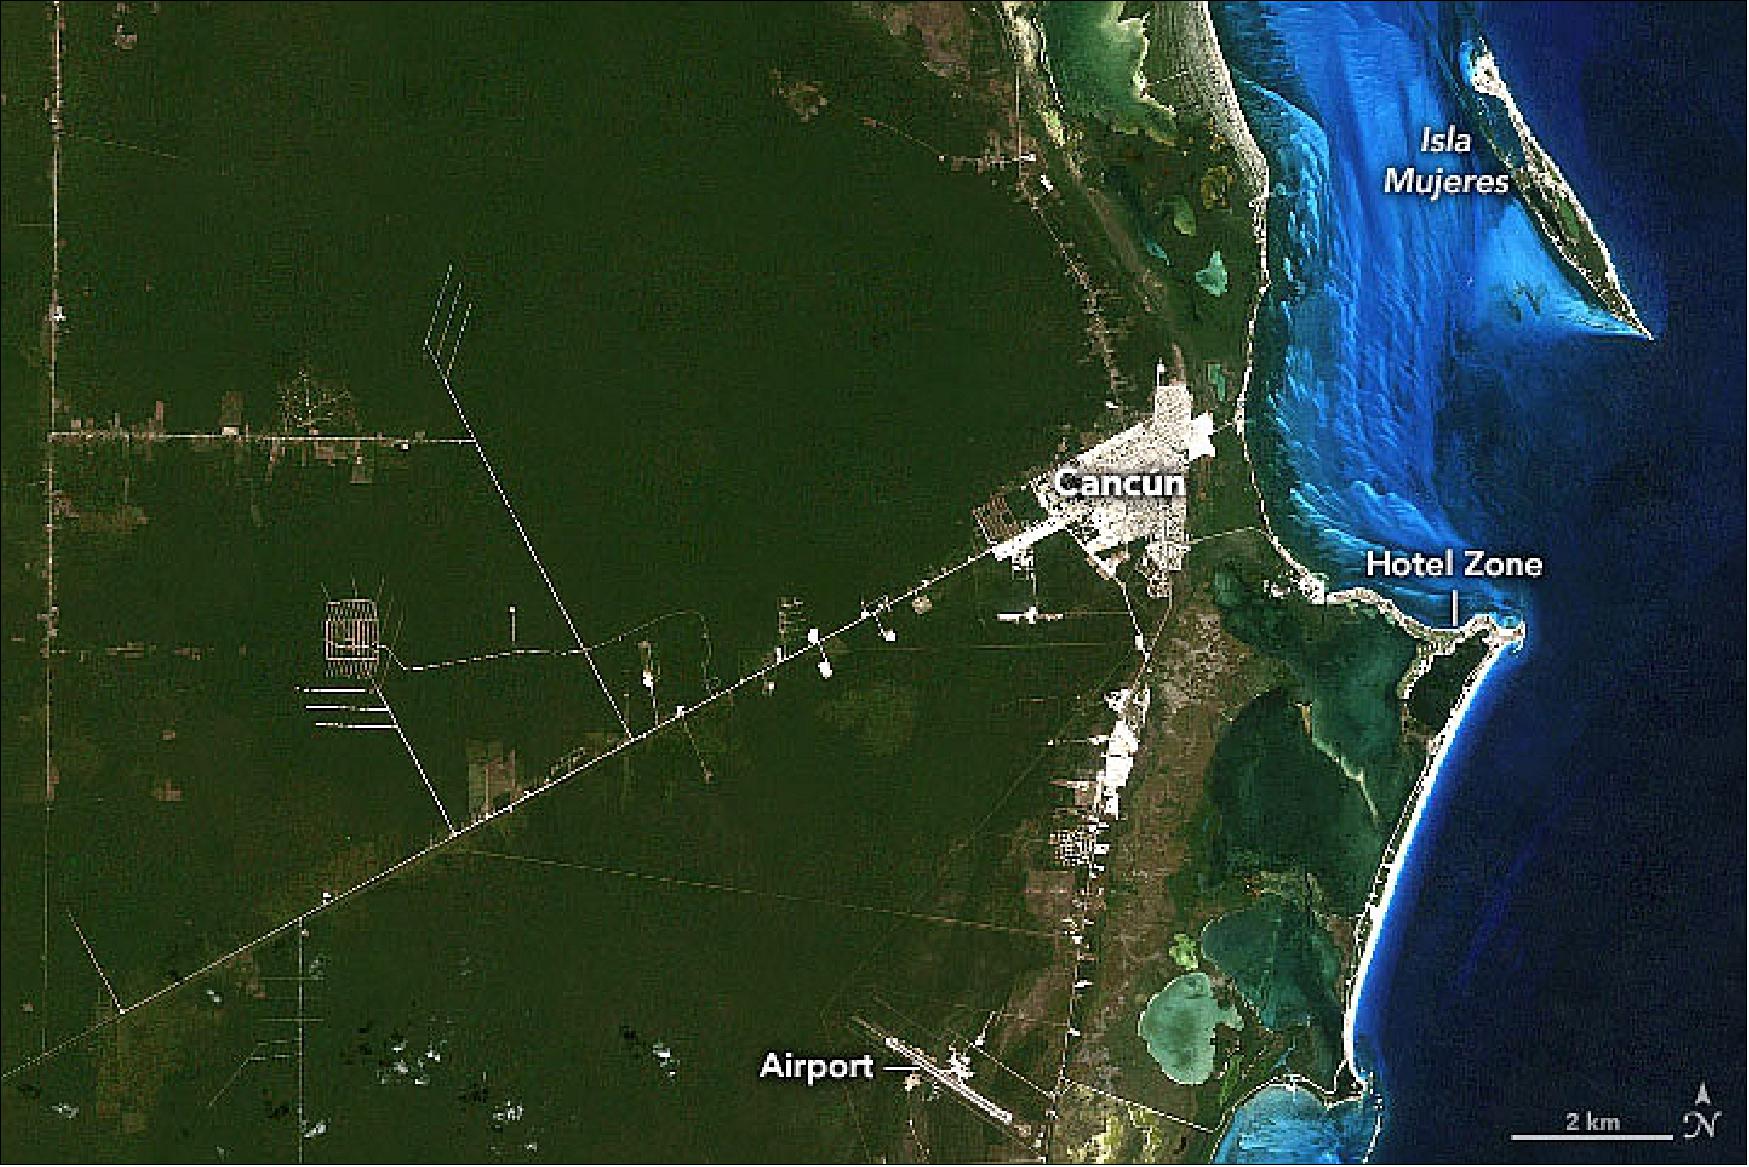 Figure 130: Image of Cancún acquired by the TM instrument of Landsat-5 on 28 March 1985 (image credit: NASA, image by Allison Nussbaum, using Landsat data from the U.S. Geological Survey. Story by Kasha Patel)